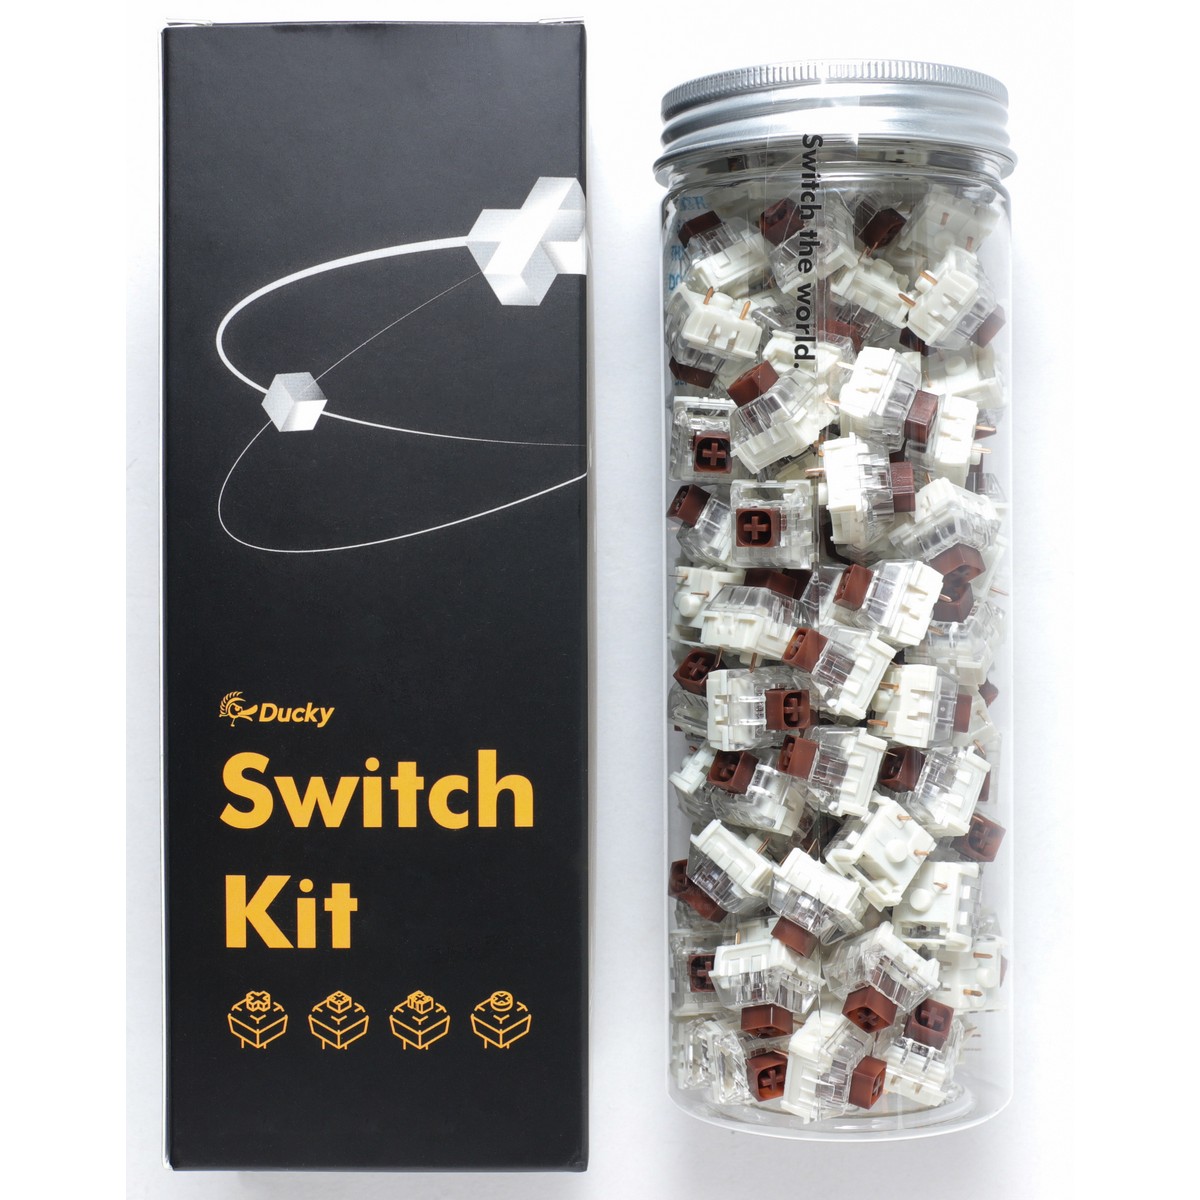 Ducky - Ducky Switch Kit Kailh Box Brown 110 Pcs